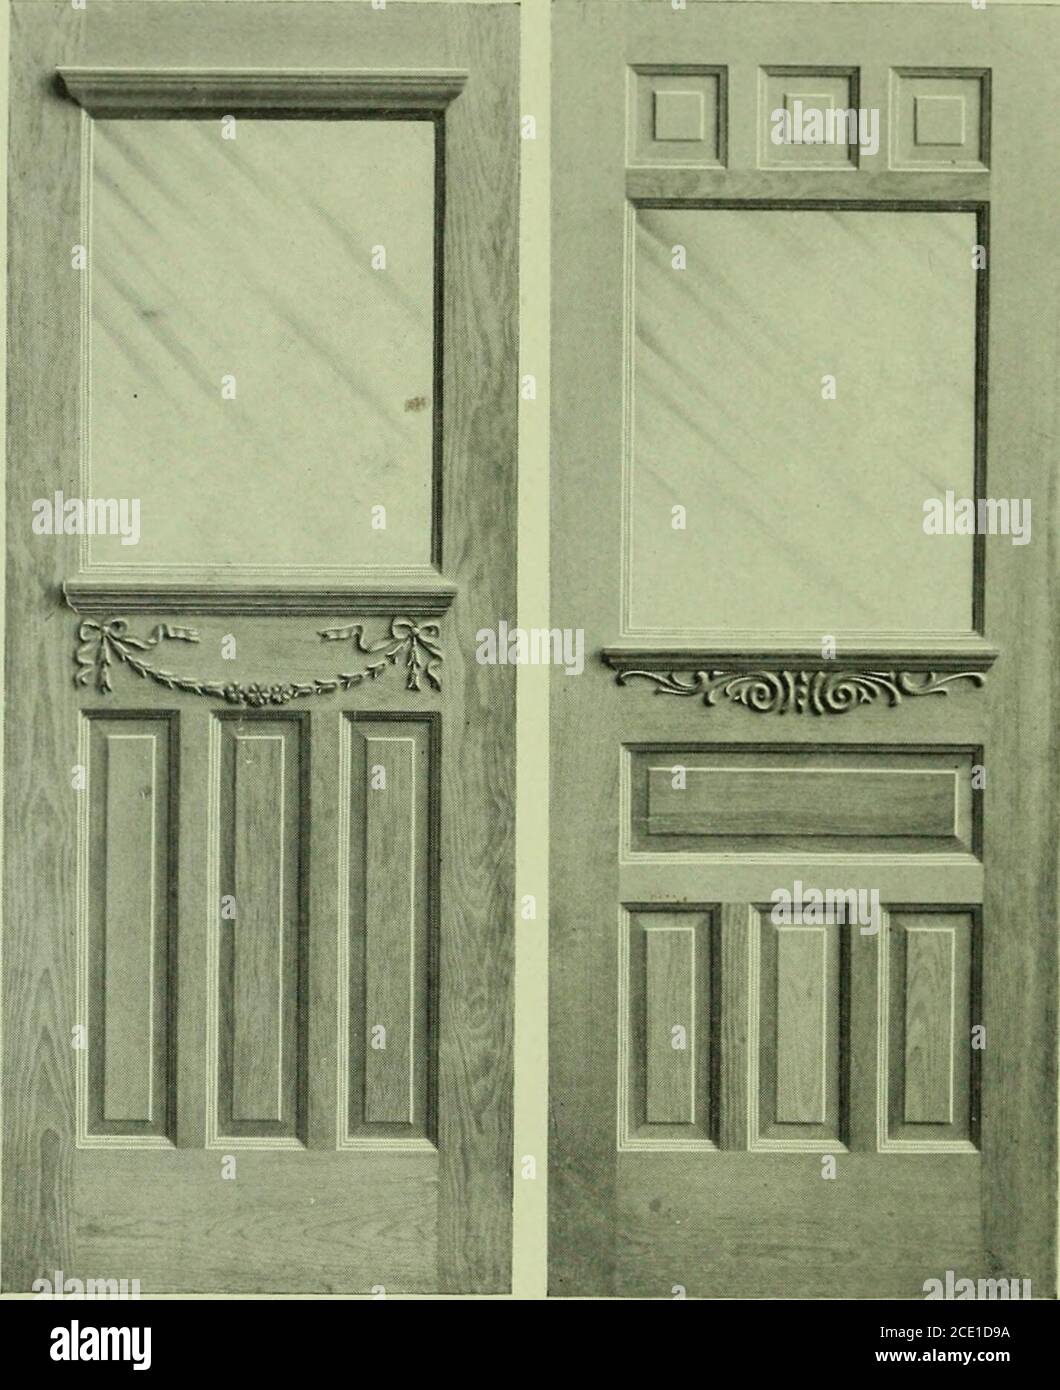 . Millwork catalogue : makers of the original patent dowelled doors, sash, blinds, fine interior finish, store and office fixtures, bank counters, dealers in lumber, etc . ?^?sggRHSB*3^ T7 T! ? I i Fig. 148 Fig. 149. Thickness Figure i is Figure it.i Size Price open PriceGlazedPlain Price (&gt;pen PriceBlazedPlain 2- 8 x 6- 8 1% $7.80 $ ..TO $ 8 35 SIO.7.-. 2-8x7- 0 9.25 11.65 9.80 12.50 2-10 x 6-10 • 8.95 l 1.35 9.50 12.05 2-10 x 7- 0 9.55 12.05 10.05 12.75 3- 0x7-0 • 9 70 12.40 1().L&gt;- 13.20 For Doors 1% inch thick add the difference in the list as shown on page 69. THE ROCKWELL MANUFACTU Stock Photo